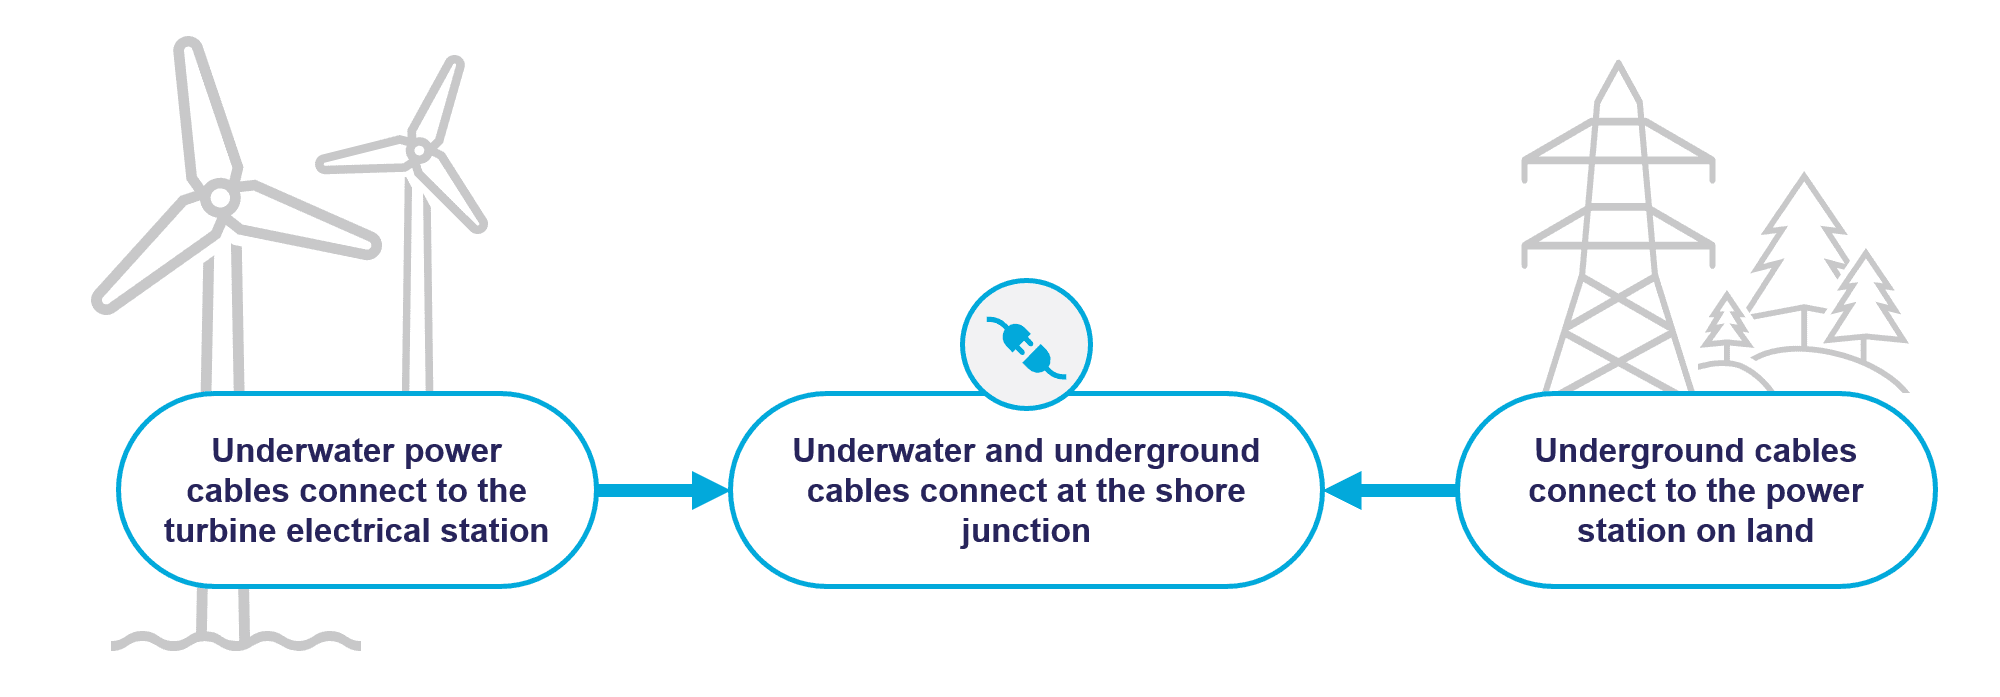 visual with text description of offshore wind power connecting to power stations on land